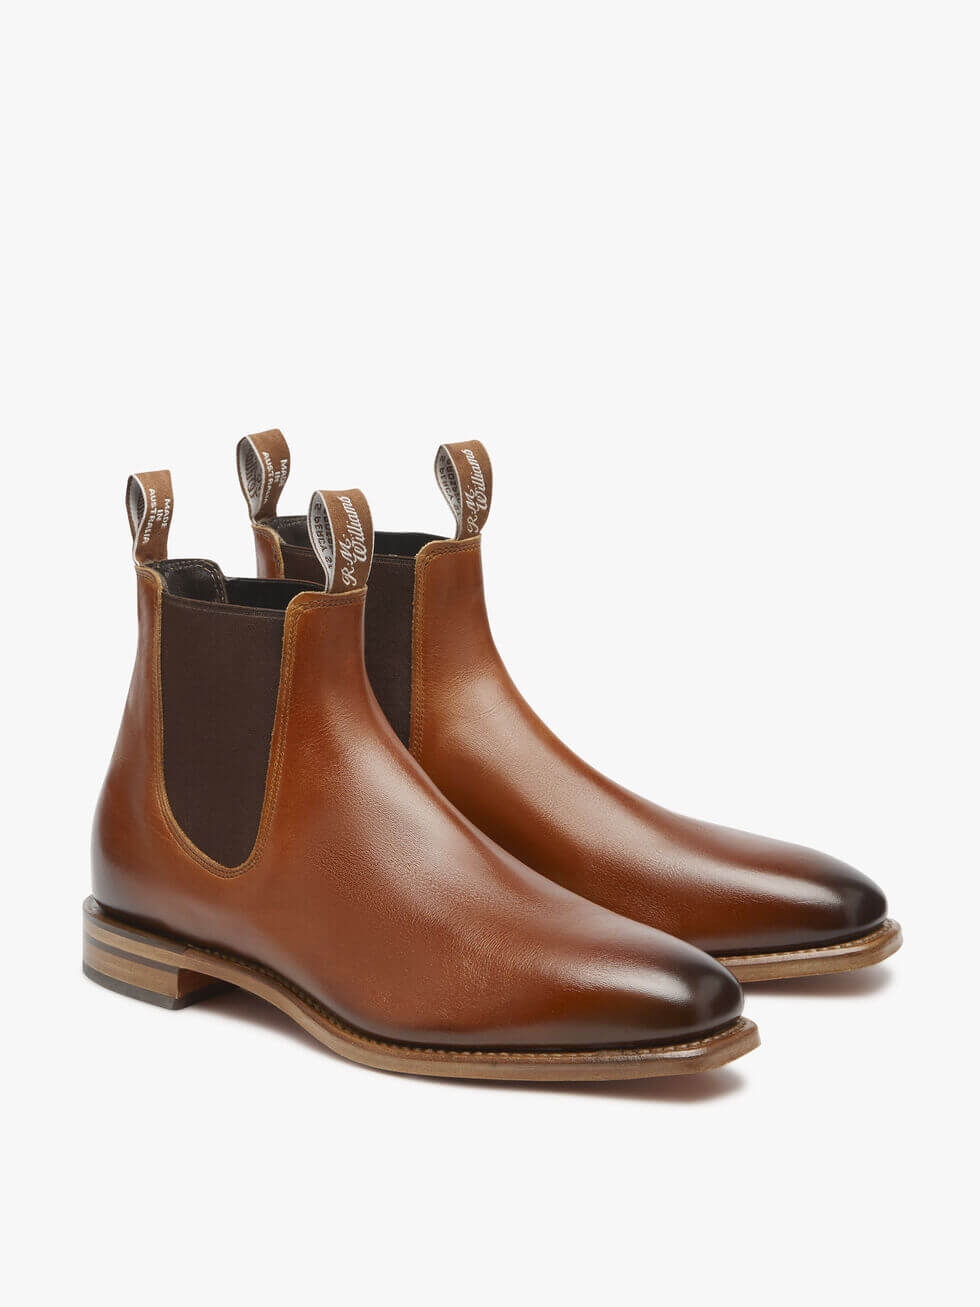 R.M. Williams Chinchilla Burnished leather Natural Sole | Davids Of Haslemere